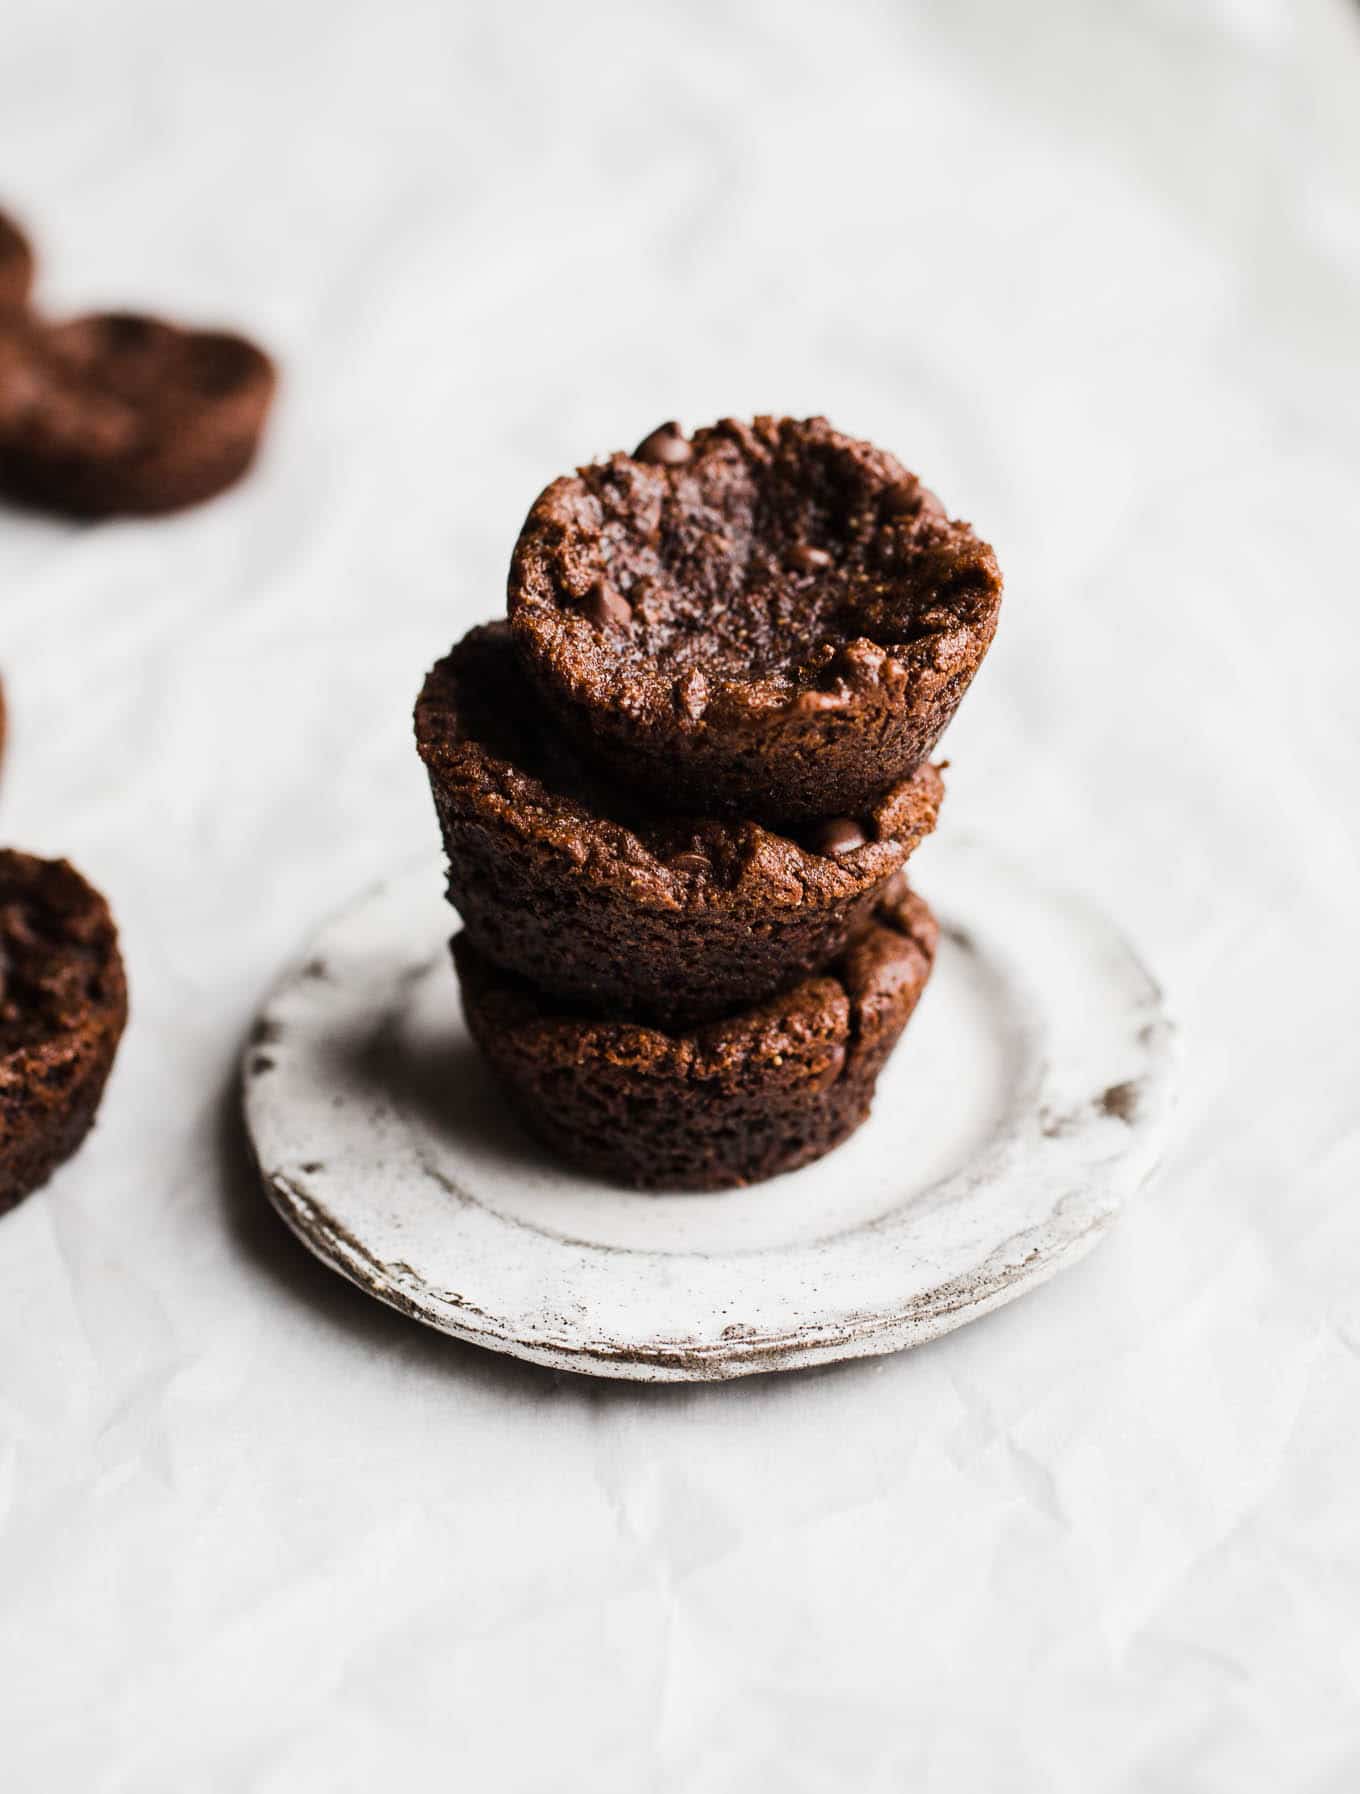 Vegan Gluten-Free Brownie Bites recipe made in a mini muffin pan for individual portions. Topped with an easy dairy-free chocolate ganache and your choice of nuts, sea salt, or sprinkles!